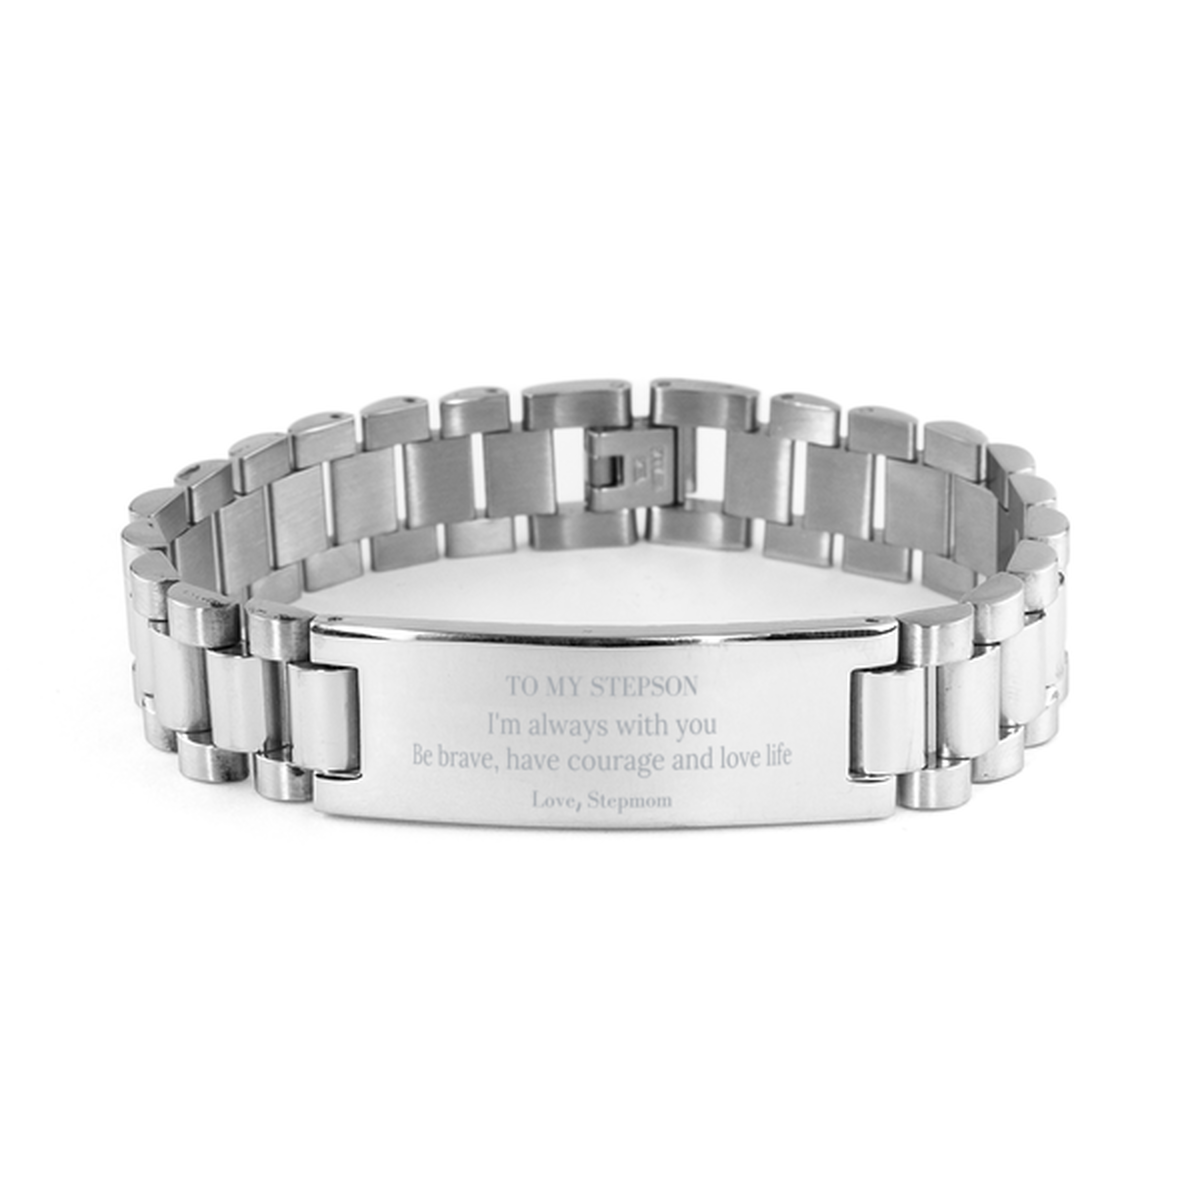 To My Stepson Gifts from Stepmom, Unique Ladder Stainless Steel Bracelet Inspirational Christmas Birthday Graduation Gifts for Stepson I'm always with you. Be brave, have courage and love life. Love, Stepmom